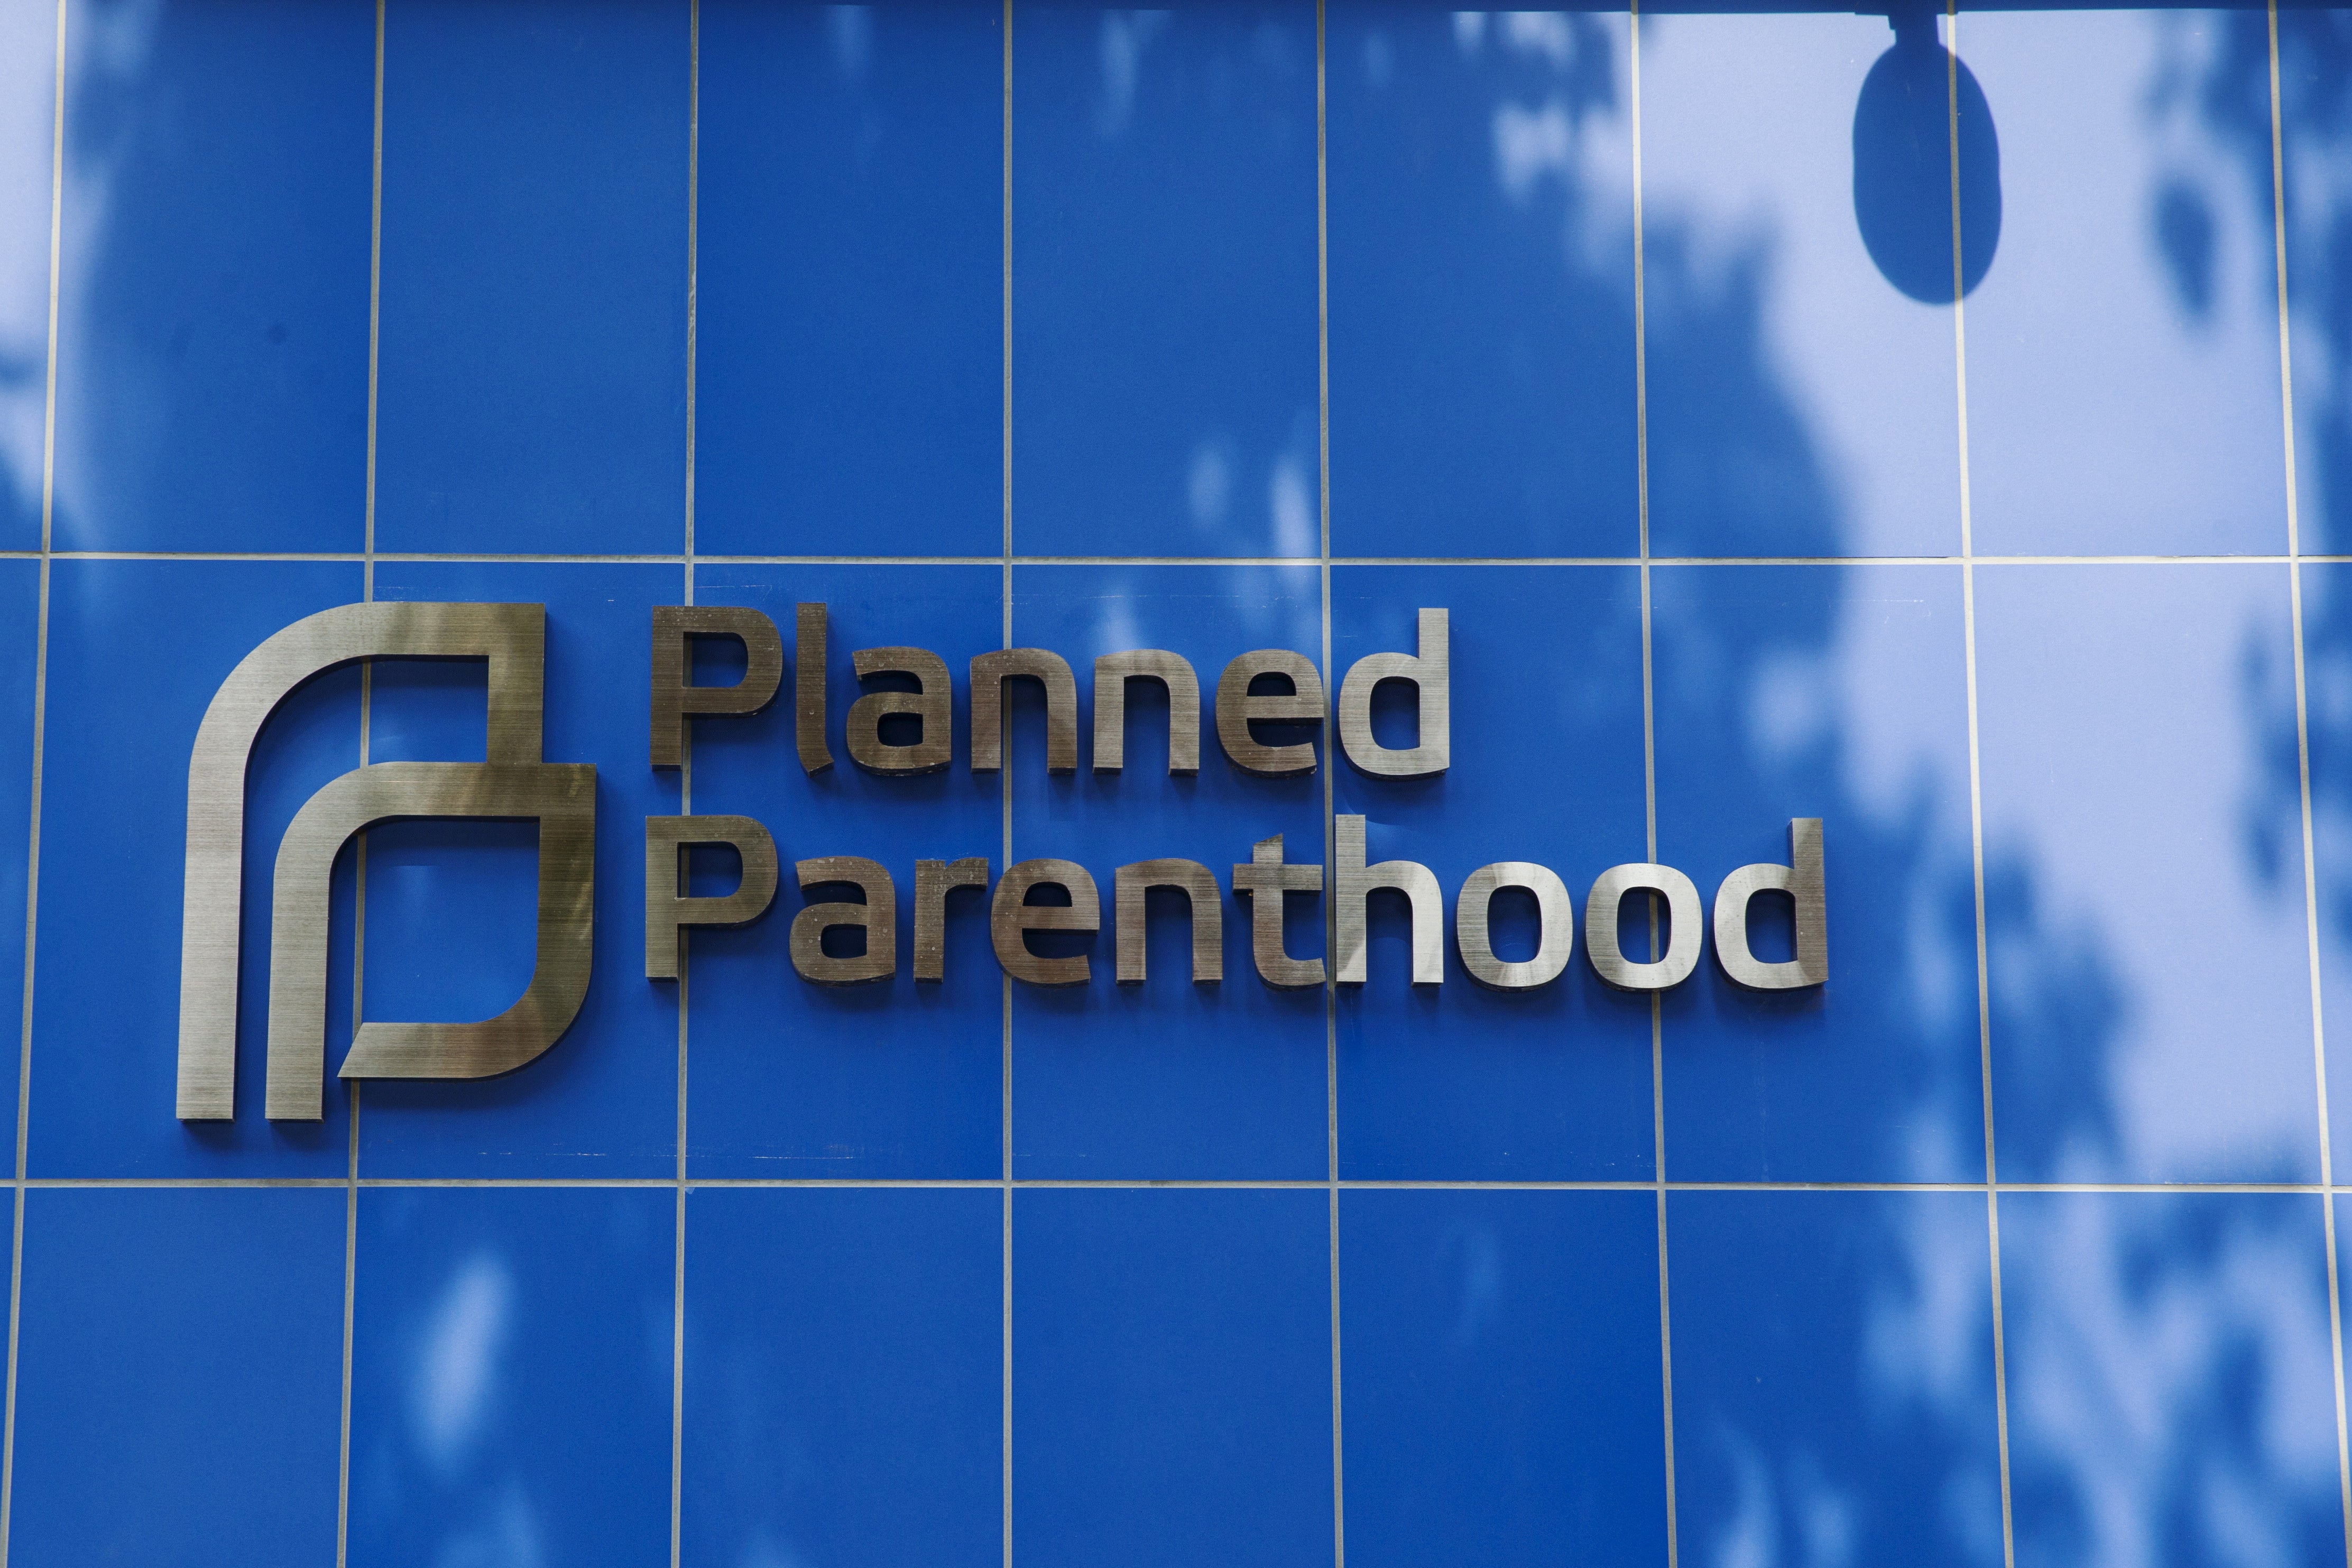 FILE PHOTO: A sign is pictured at the entrance to a Planned Parenthood building in New York August 31, 2015. Picture taken August 31, 2015. To match Insight USA-PLANNEDPARENTHOOD/ REUTERS/Lucas Jackson/File Photo